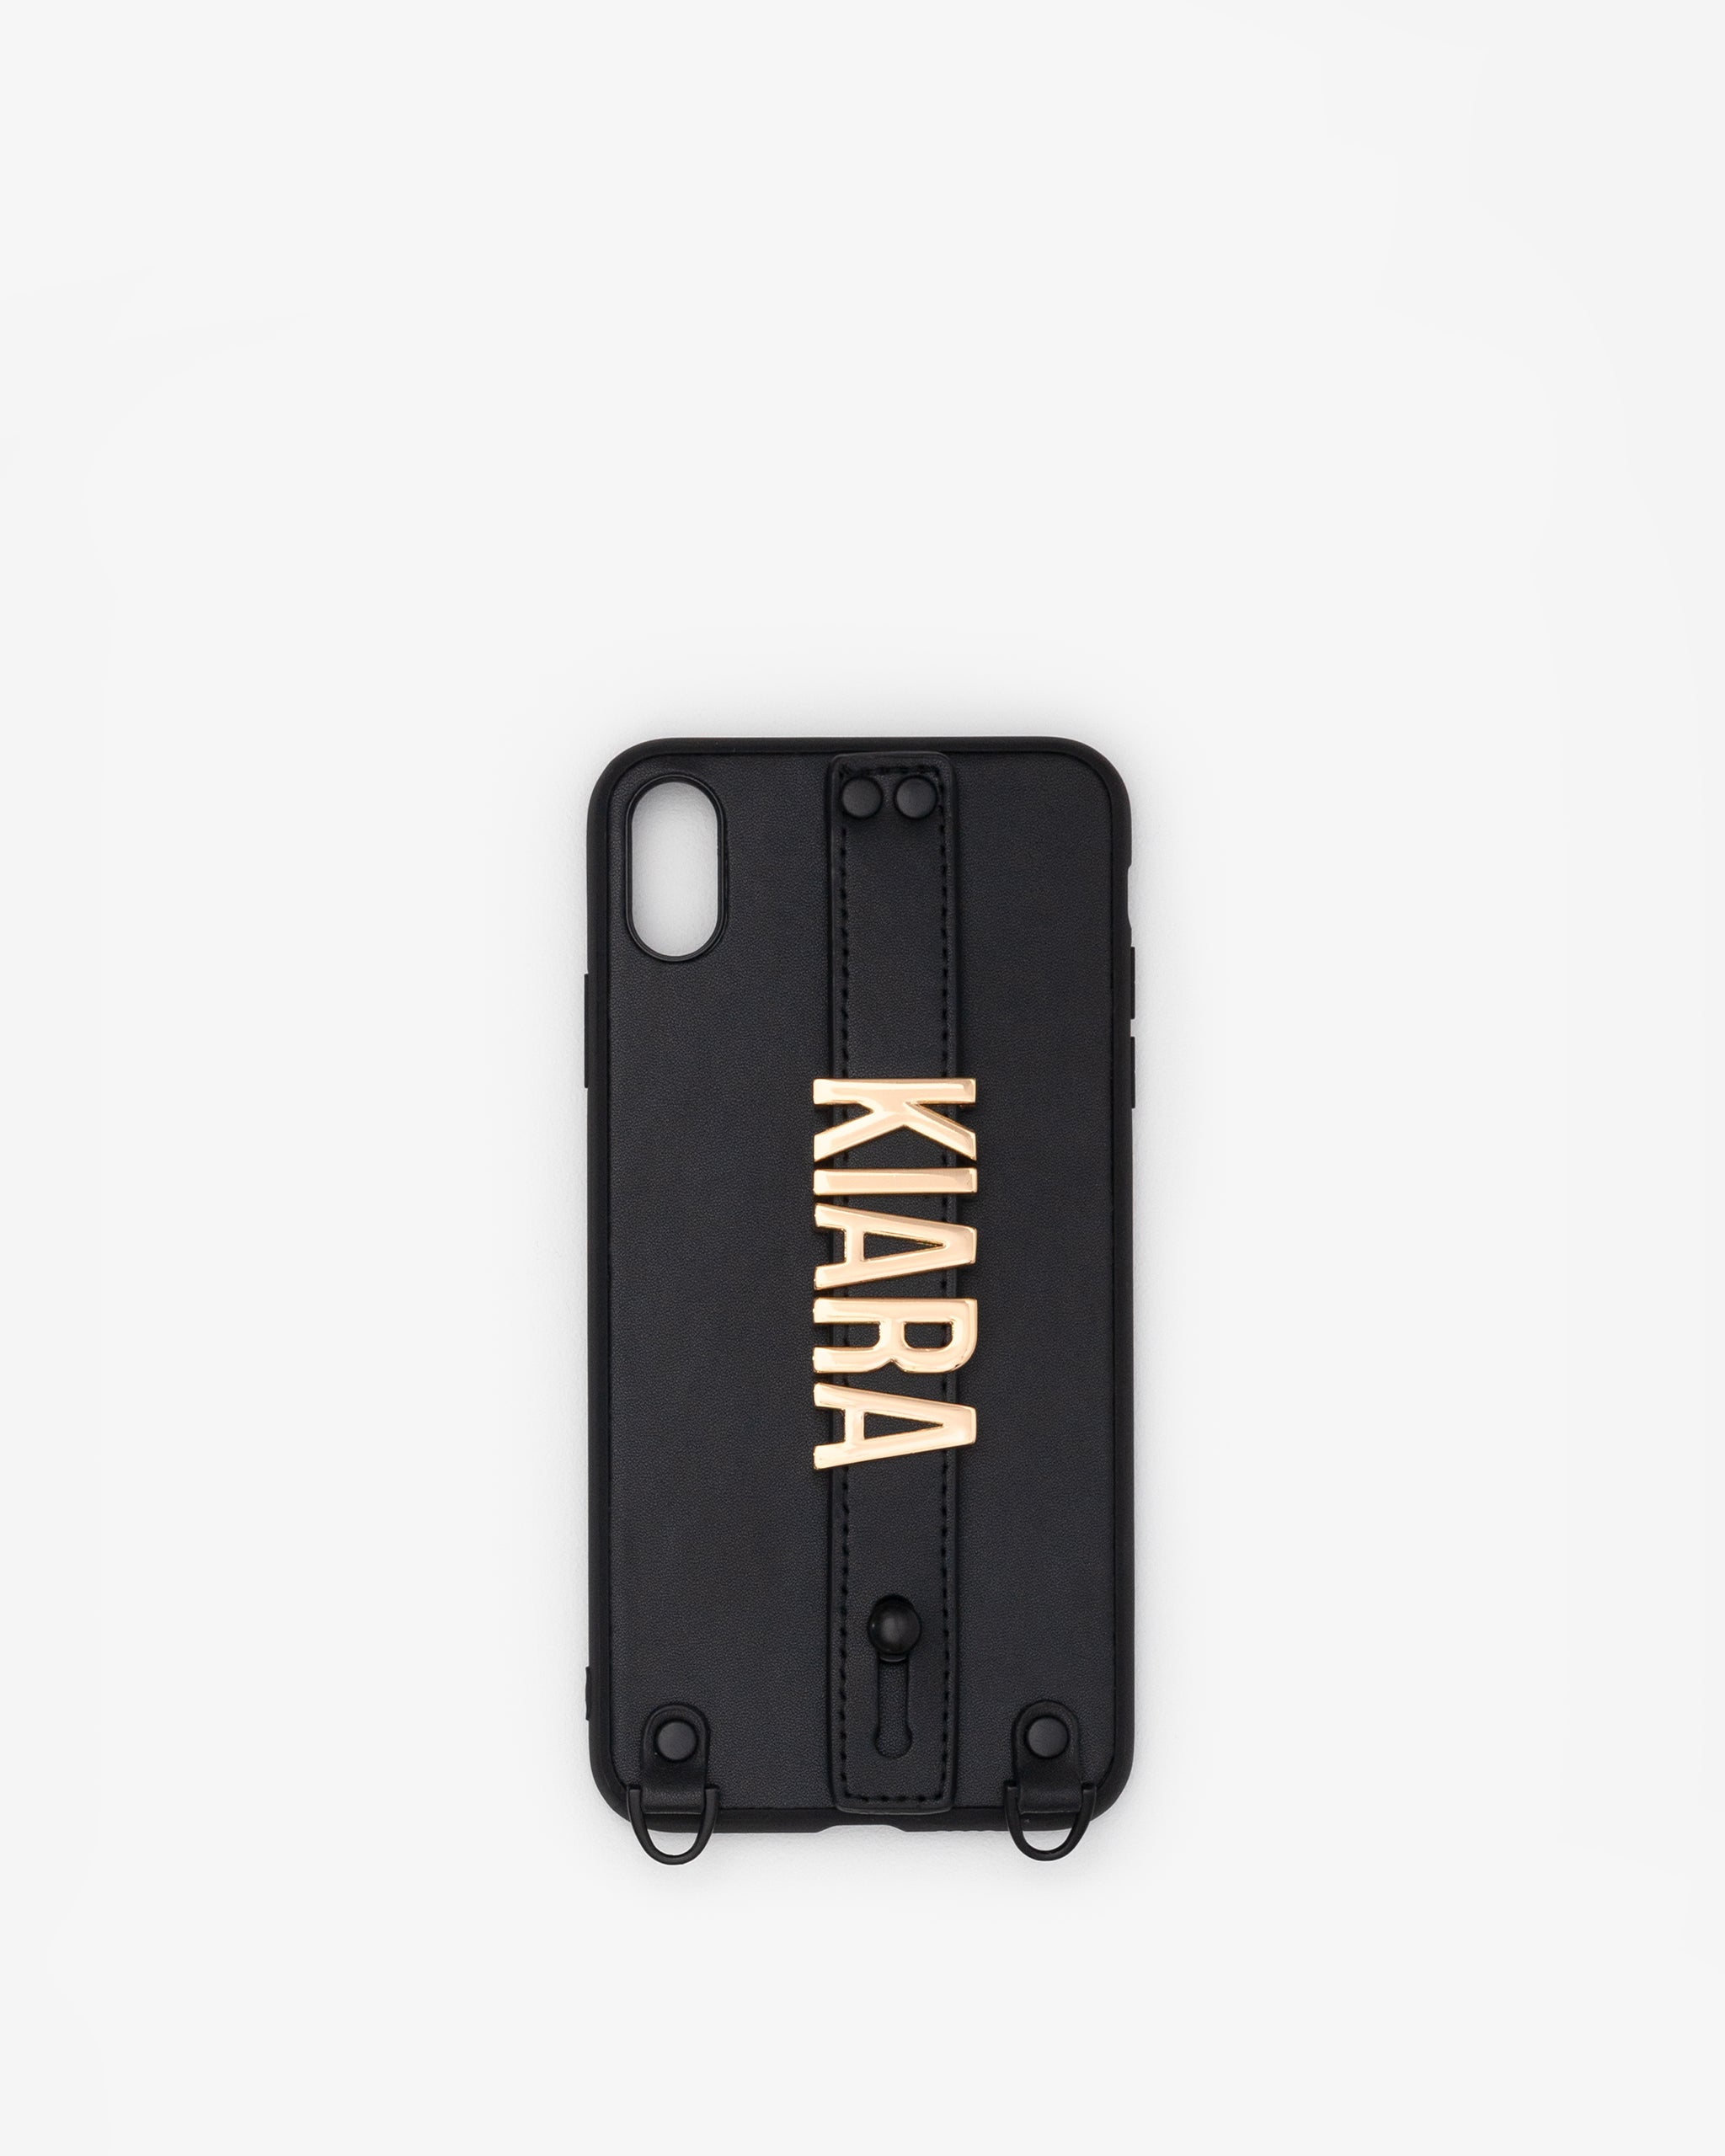 iPhone XS Max Case in Black/Gold with Personalised Hardware